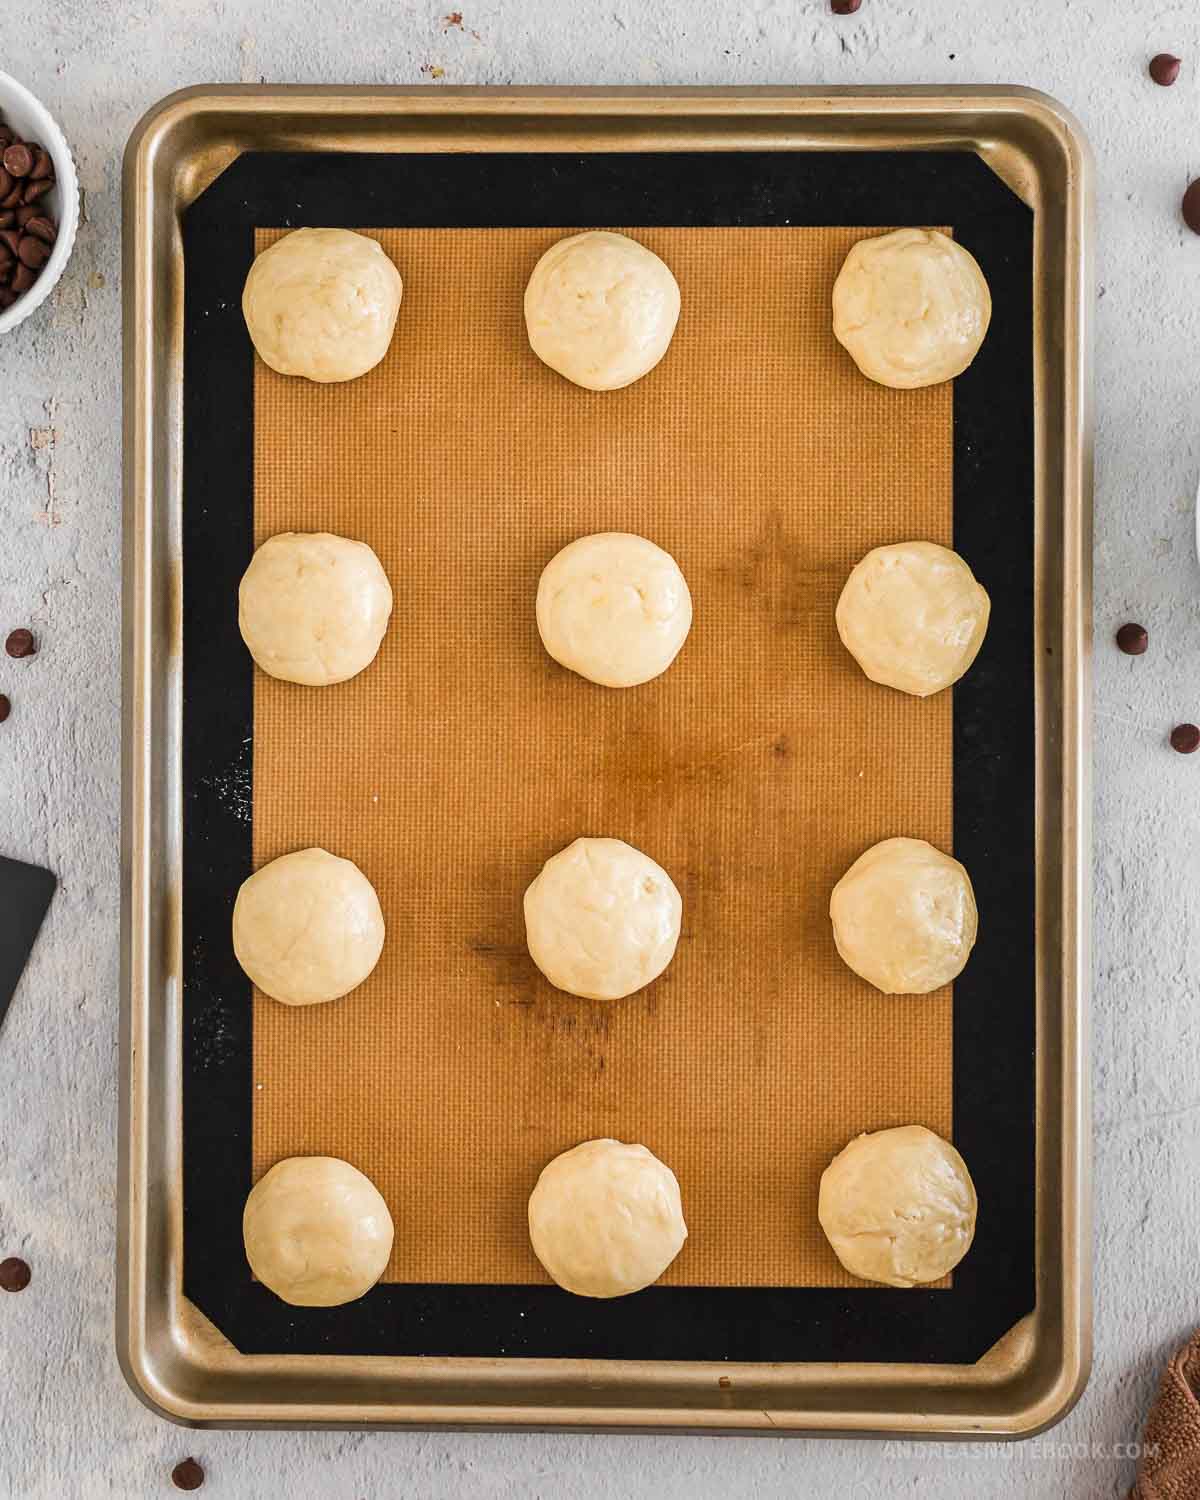 Baking sheet with 12 round cookie dough balls.